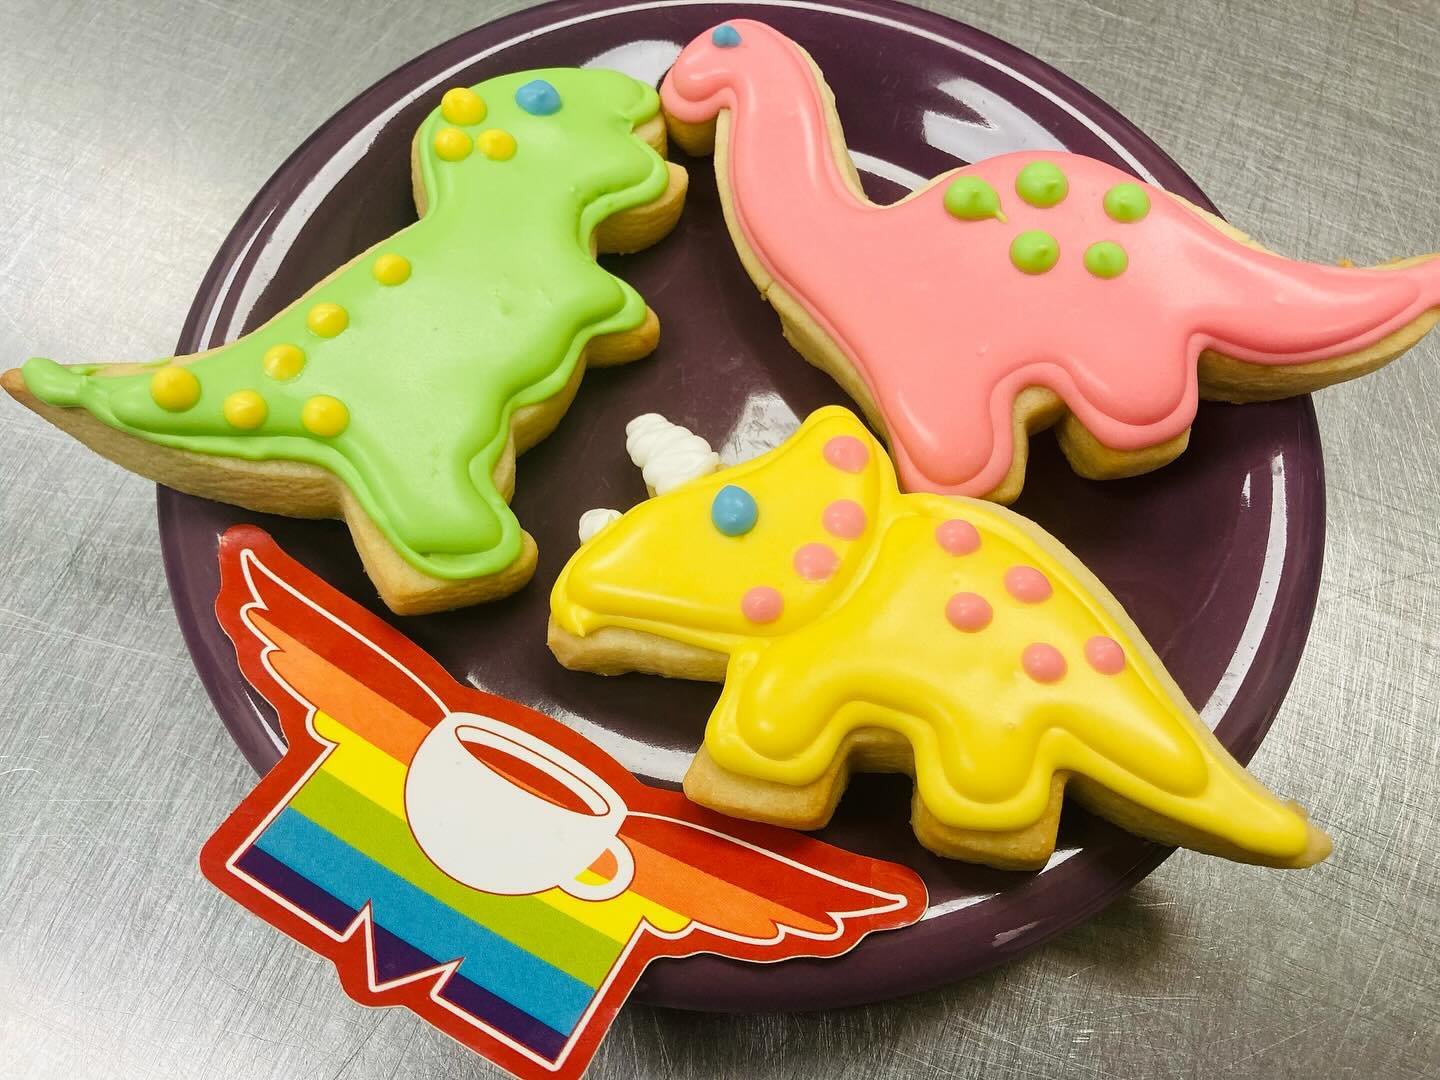 It&rsquo;s Sugar Cookie Friday, we&rsquo;re serving up Spring Dino&rsquo;s! In the case now! 🦕 #flyingmboise #flyingm #downtownboise